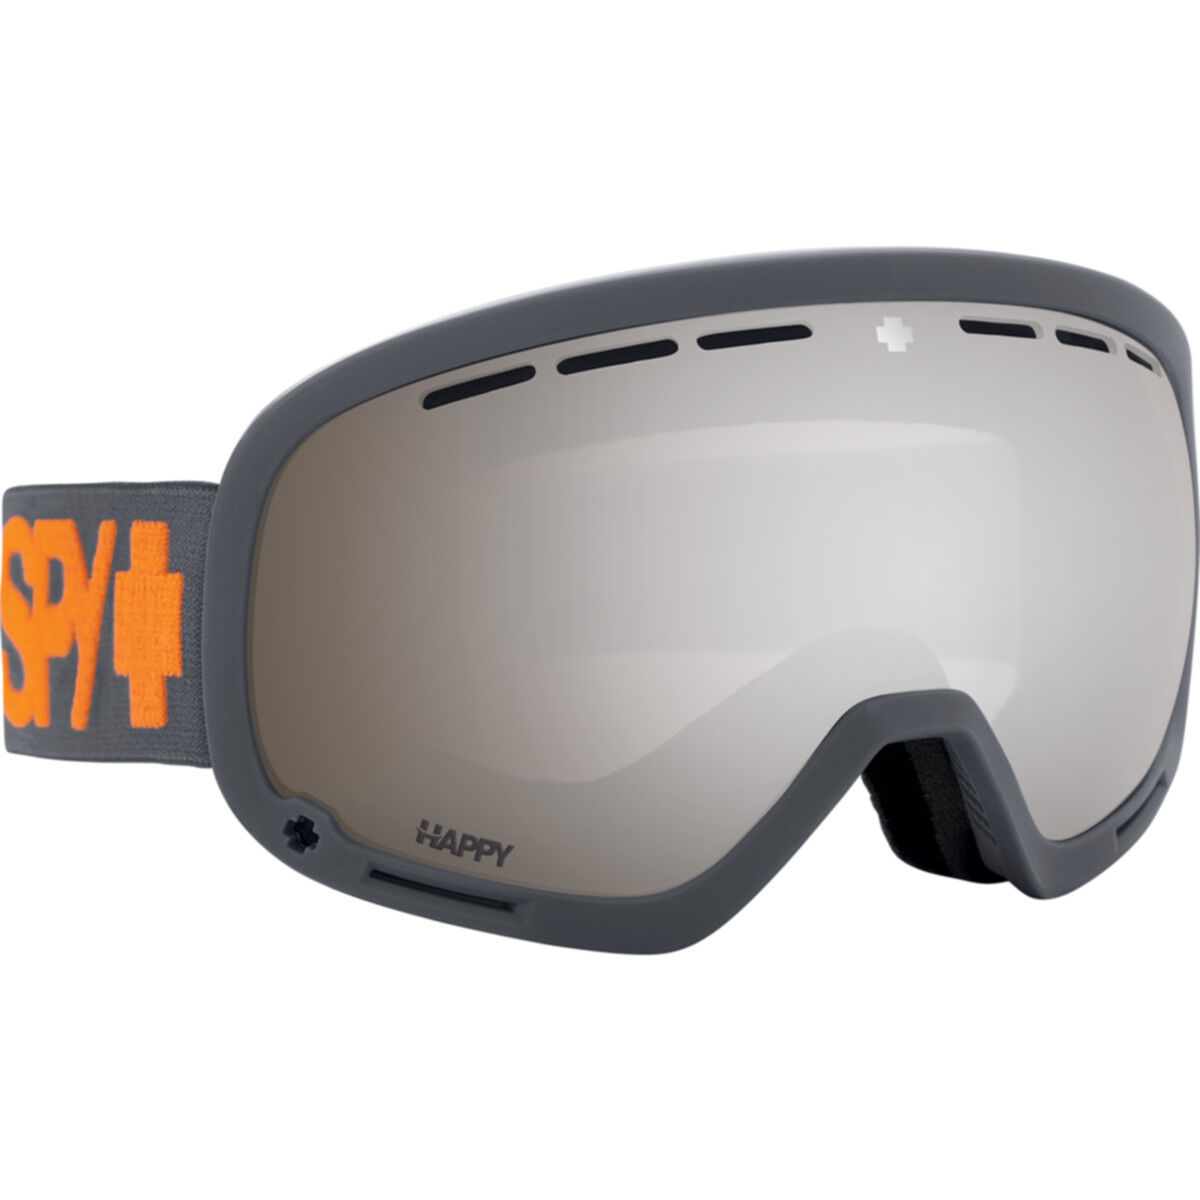 Motocross & Snowboard Goggle Sale - Up to 25% Off | SPY Optic